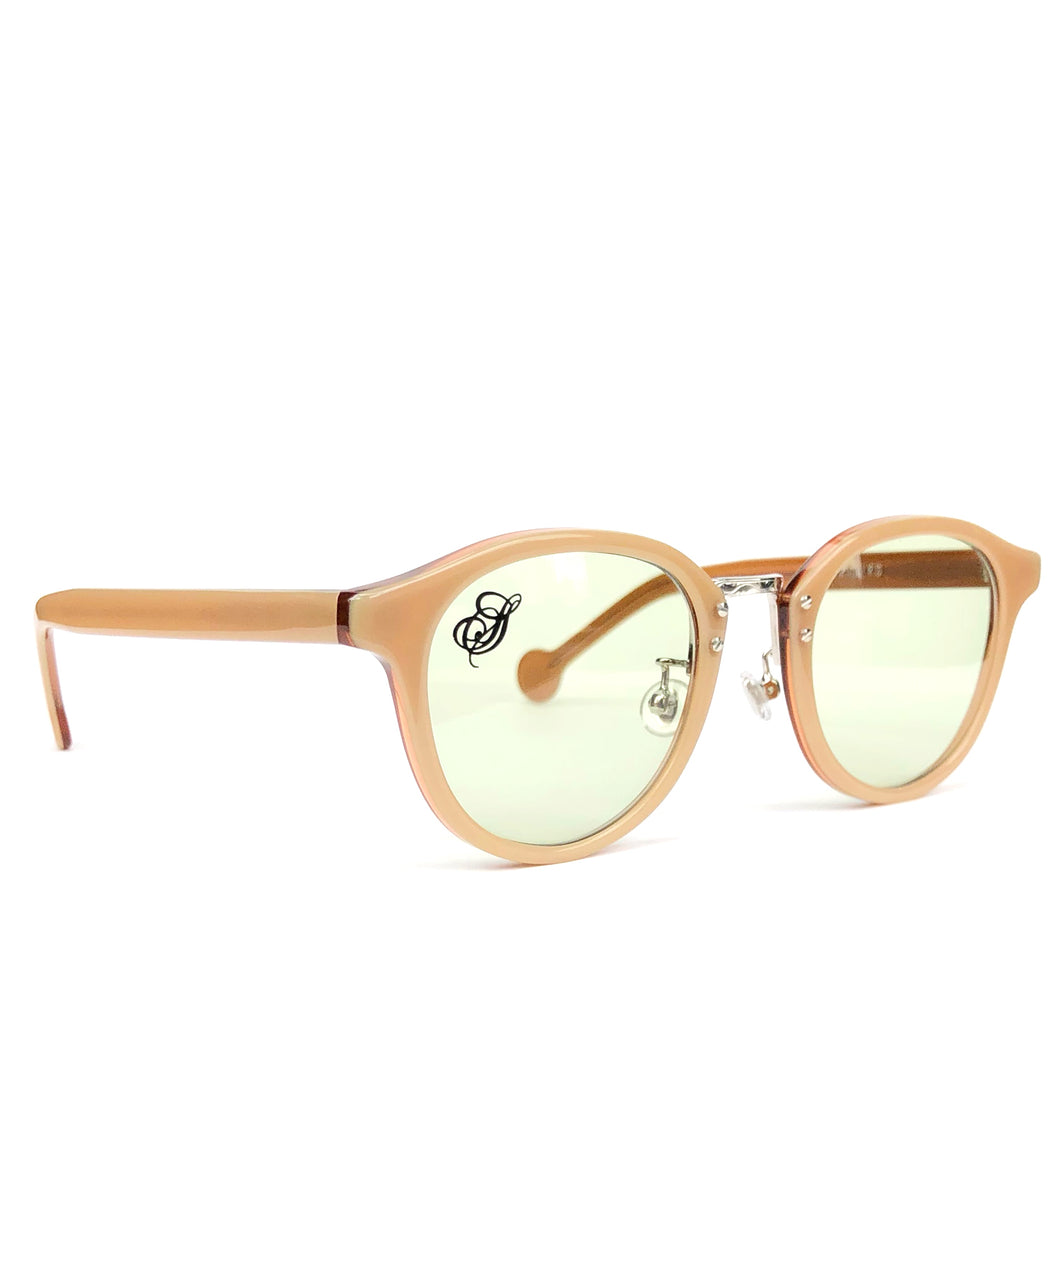 Session by STRUM Special Order Sunglasses - Beige